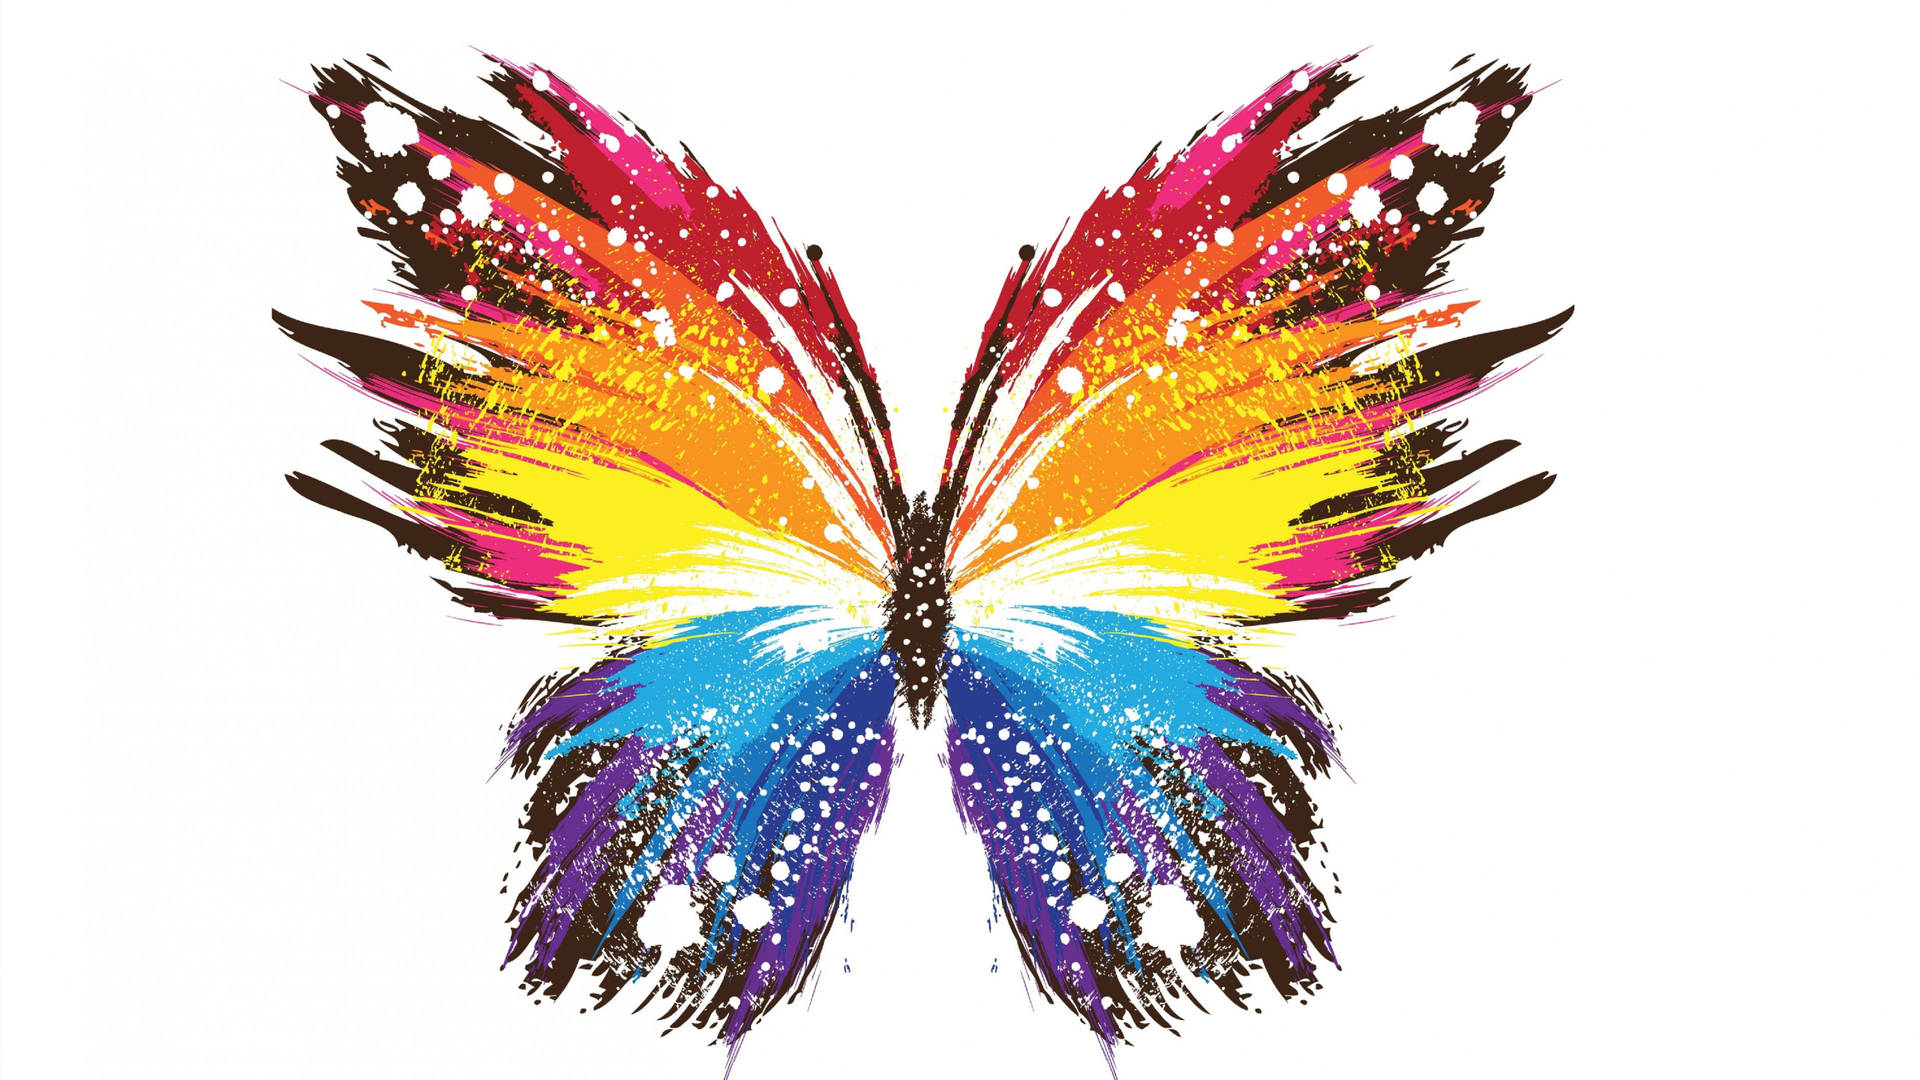 Colorful Butterfly Illustration Wallpaper